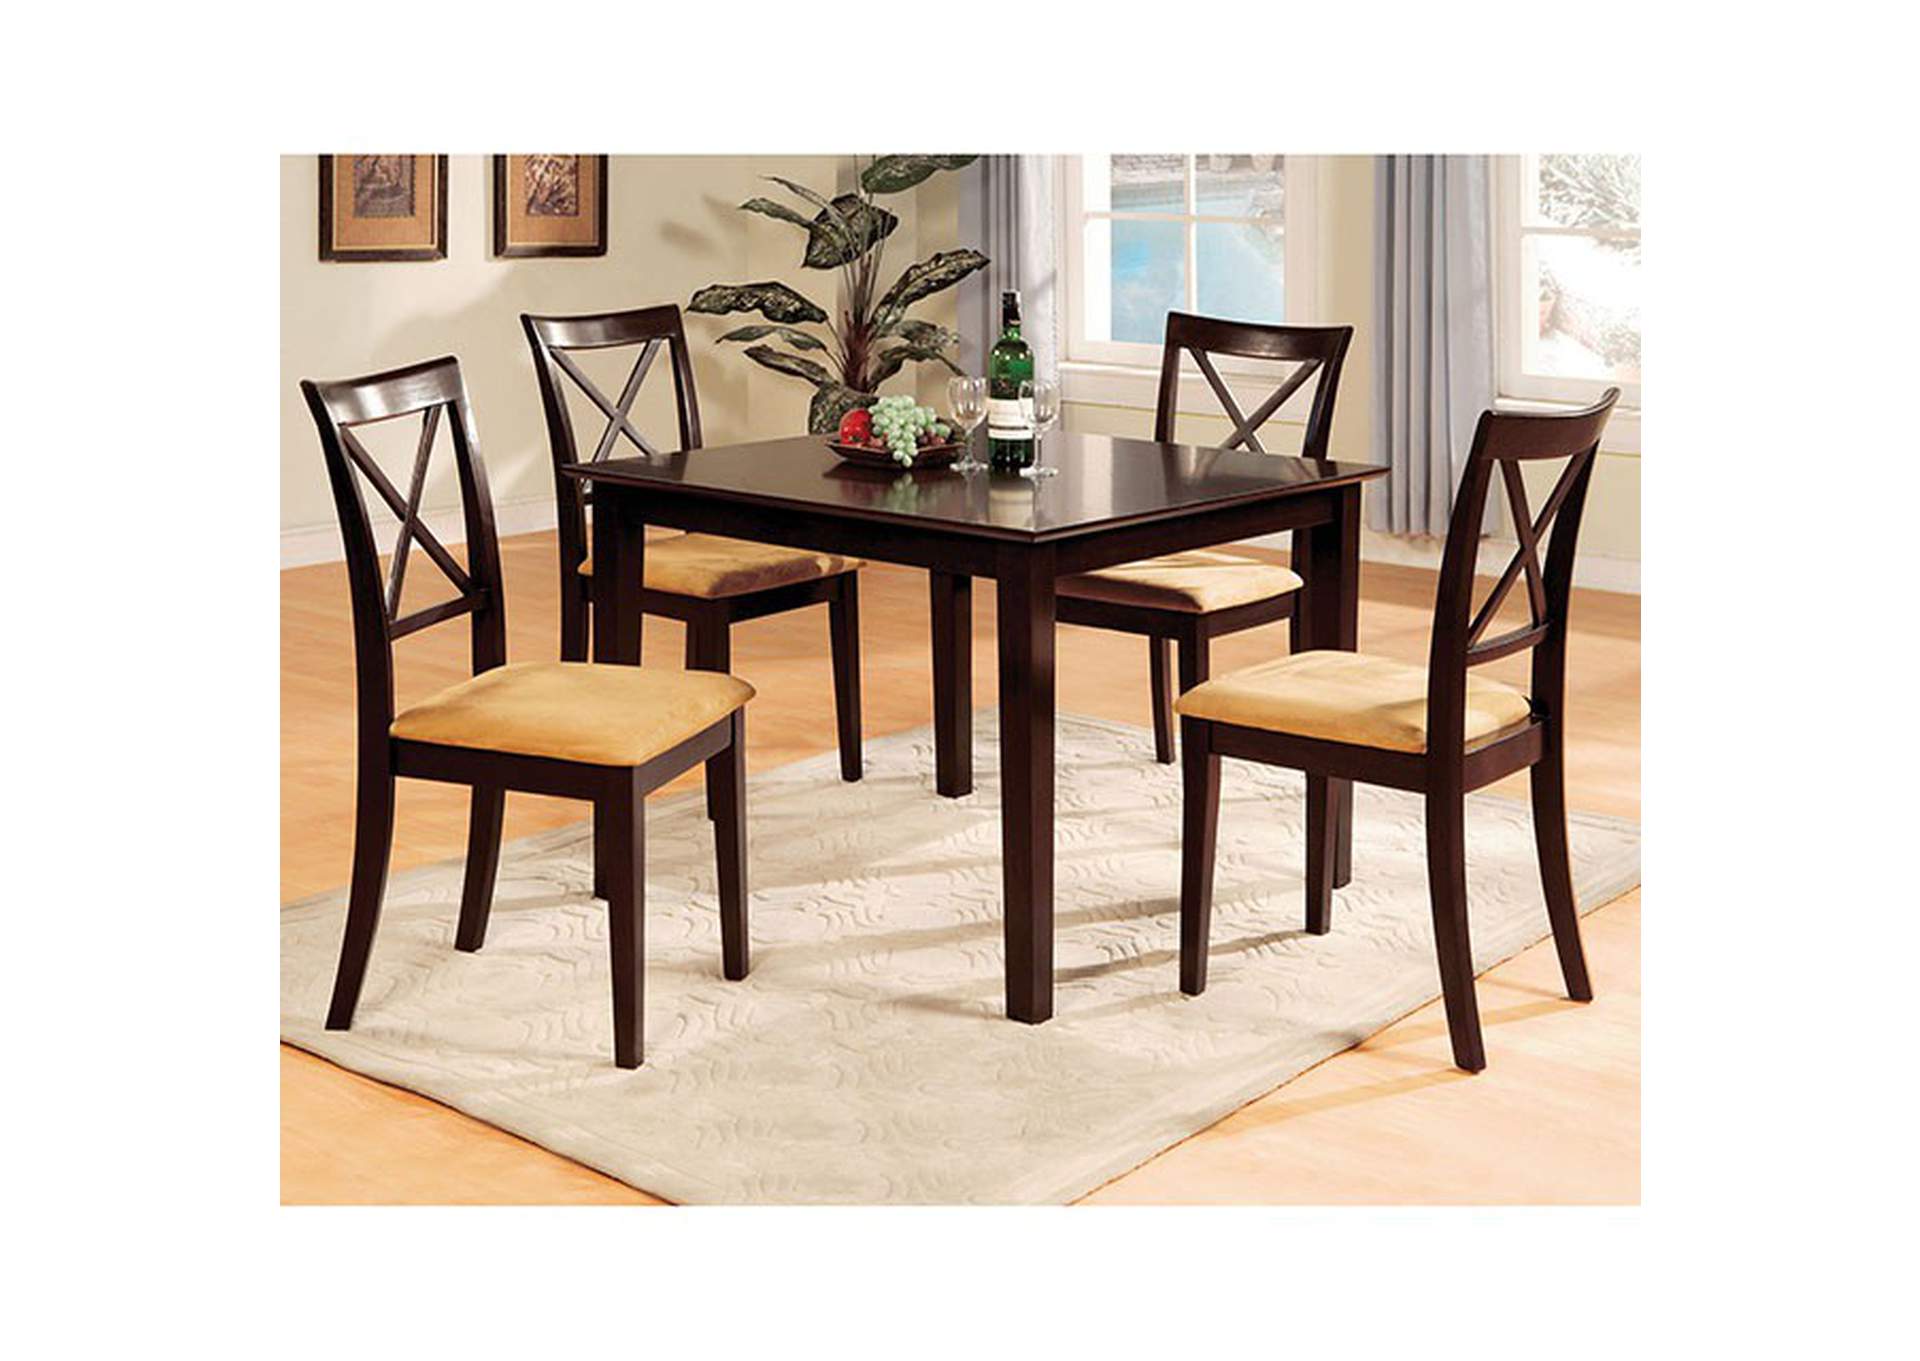 Melbourne 38" Square Dining Table,Furniture of America